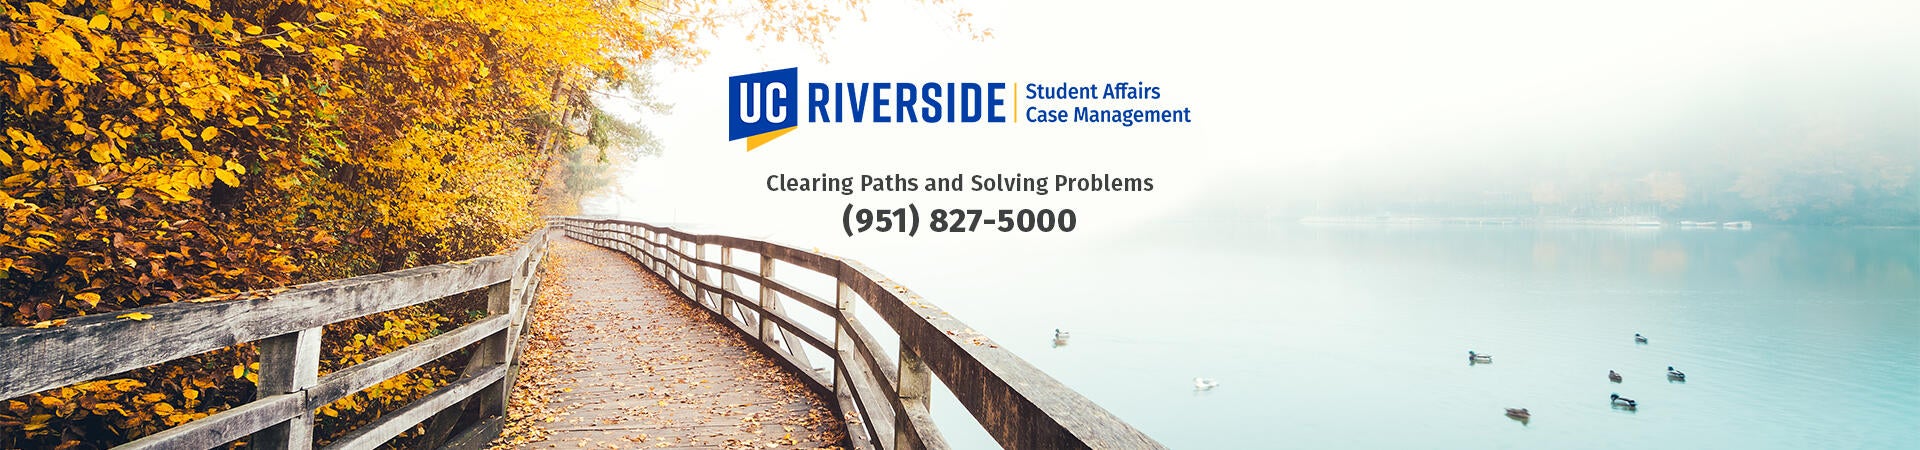 Student Affairs Case Management: Clearing Paths and Solving Problems (951) 827-5000